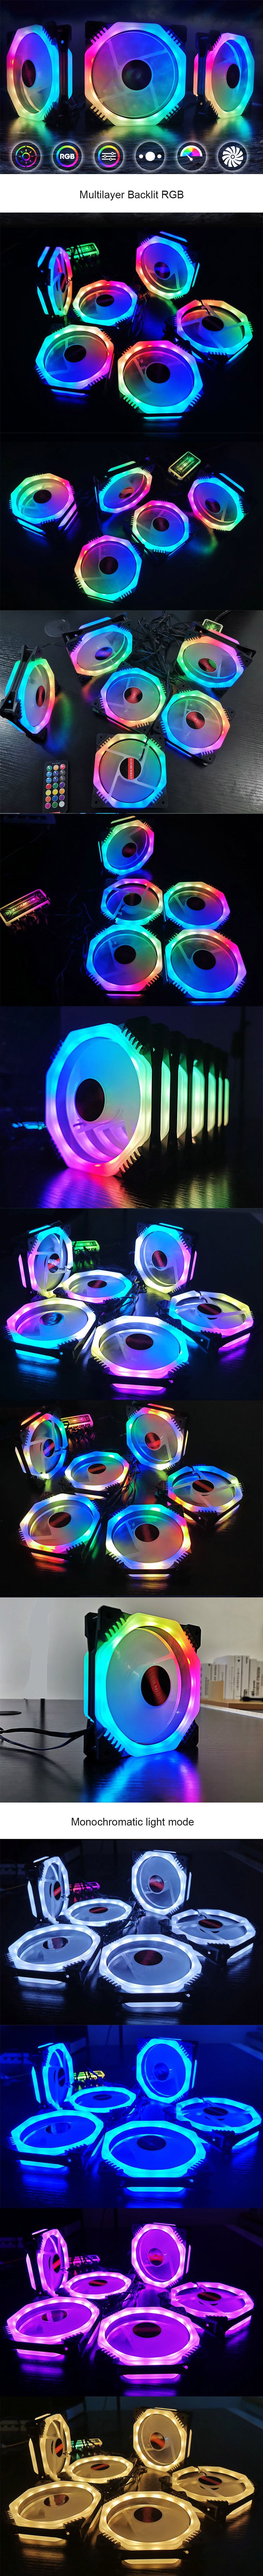 Coolmoon-3PCS-120mm-Multilayer-Backlit-Adjustable-RGB-Light-Computer-Case-PC-Cooling-Fan-with-the-Re-1580233